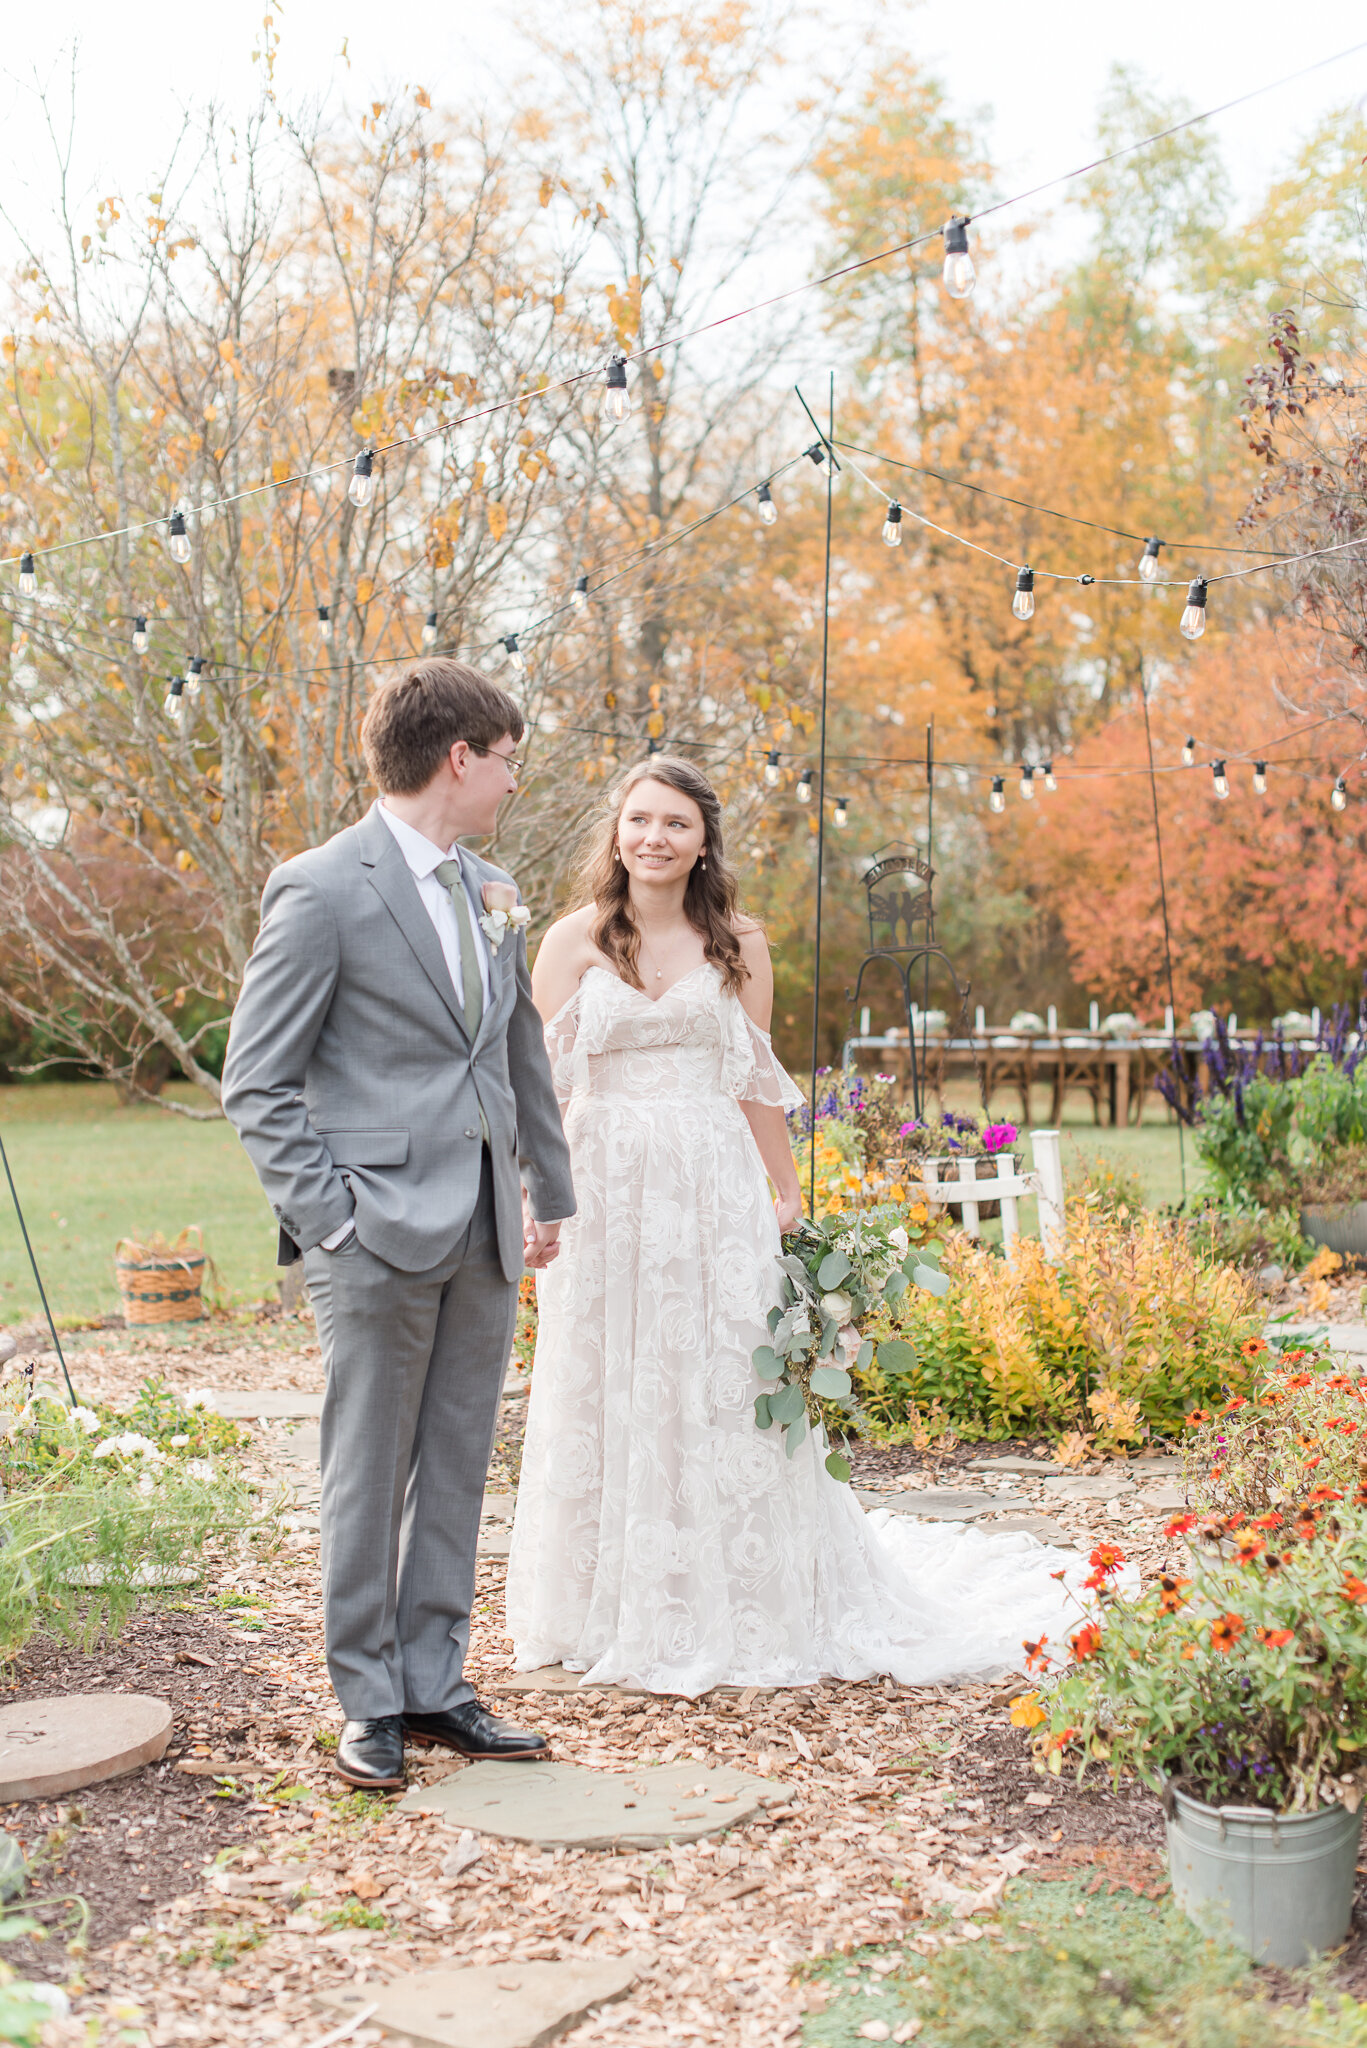 Covid Elopement In Indiana7048.jpg